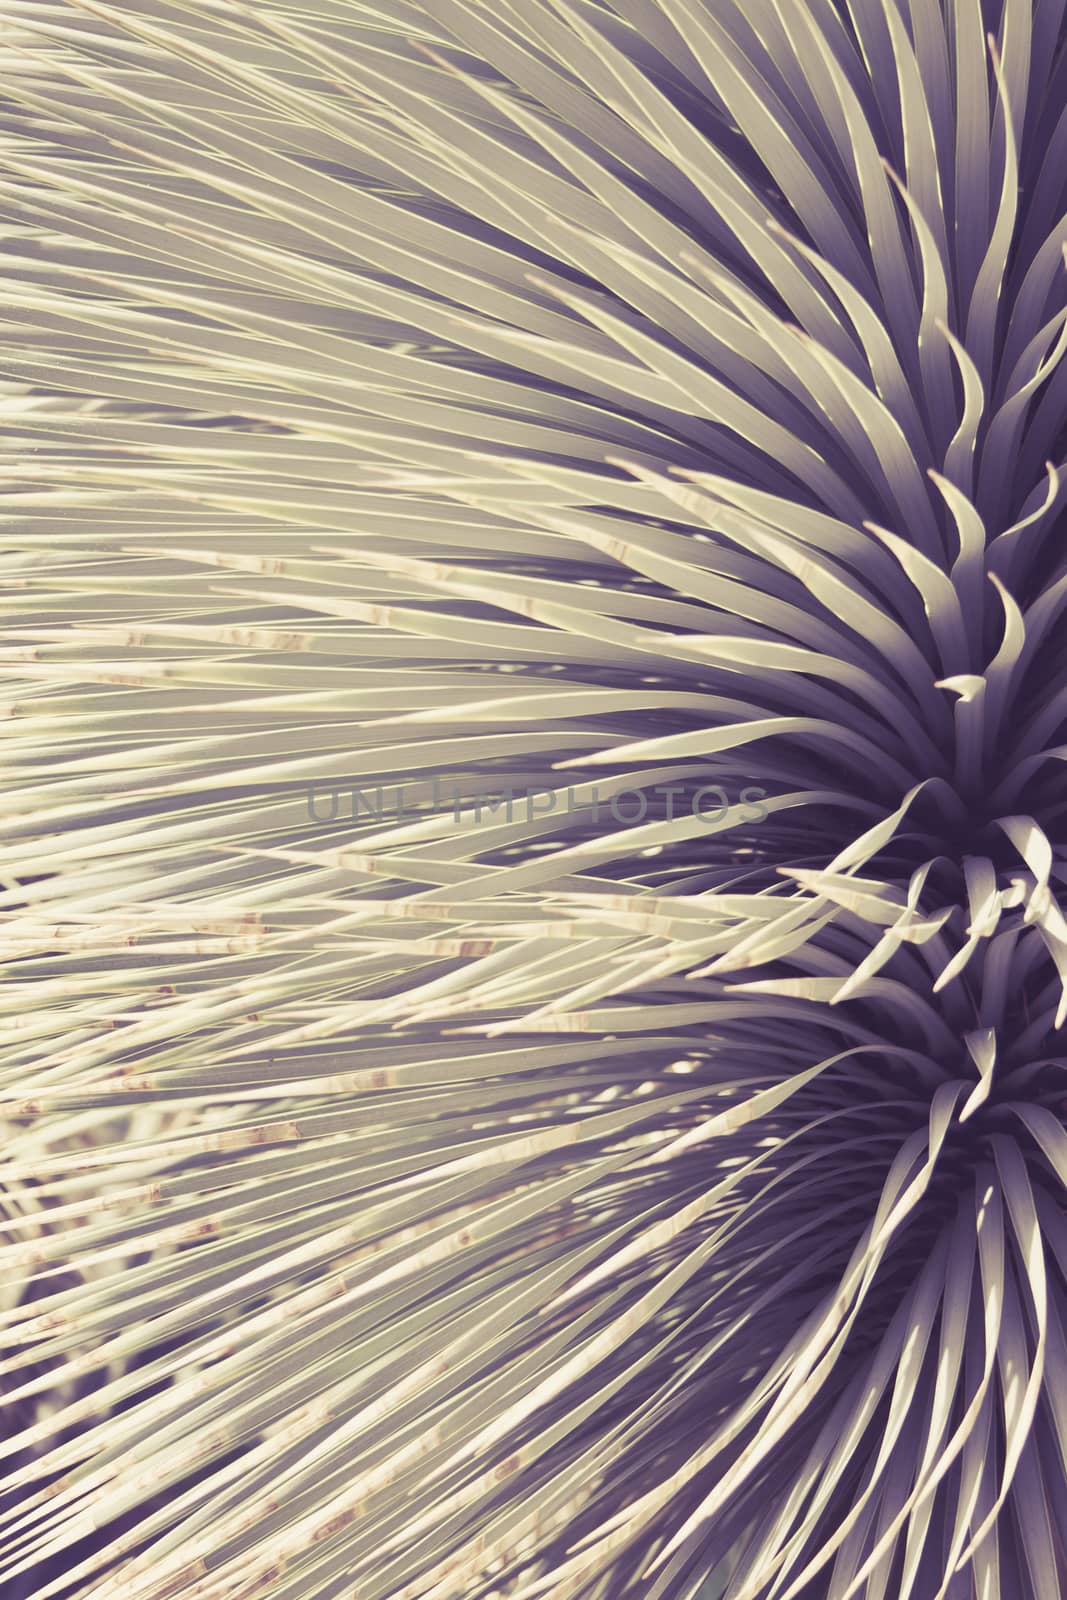 Spiked Agave plant close up, art background